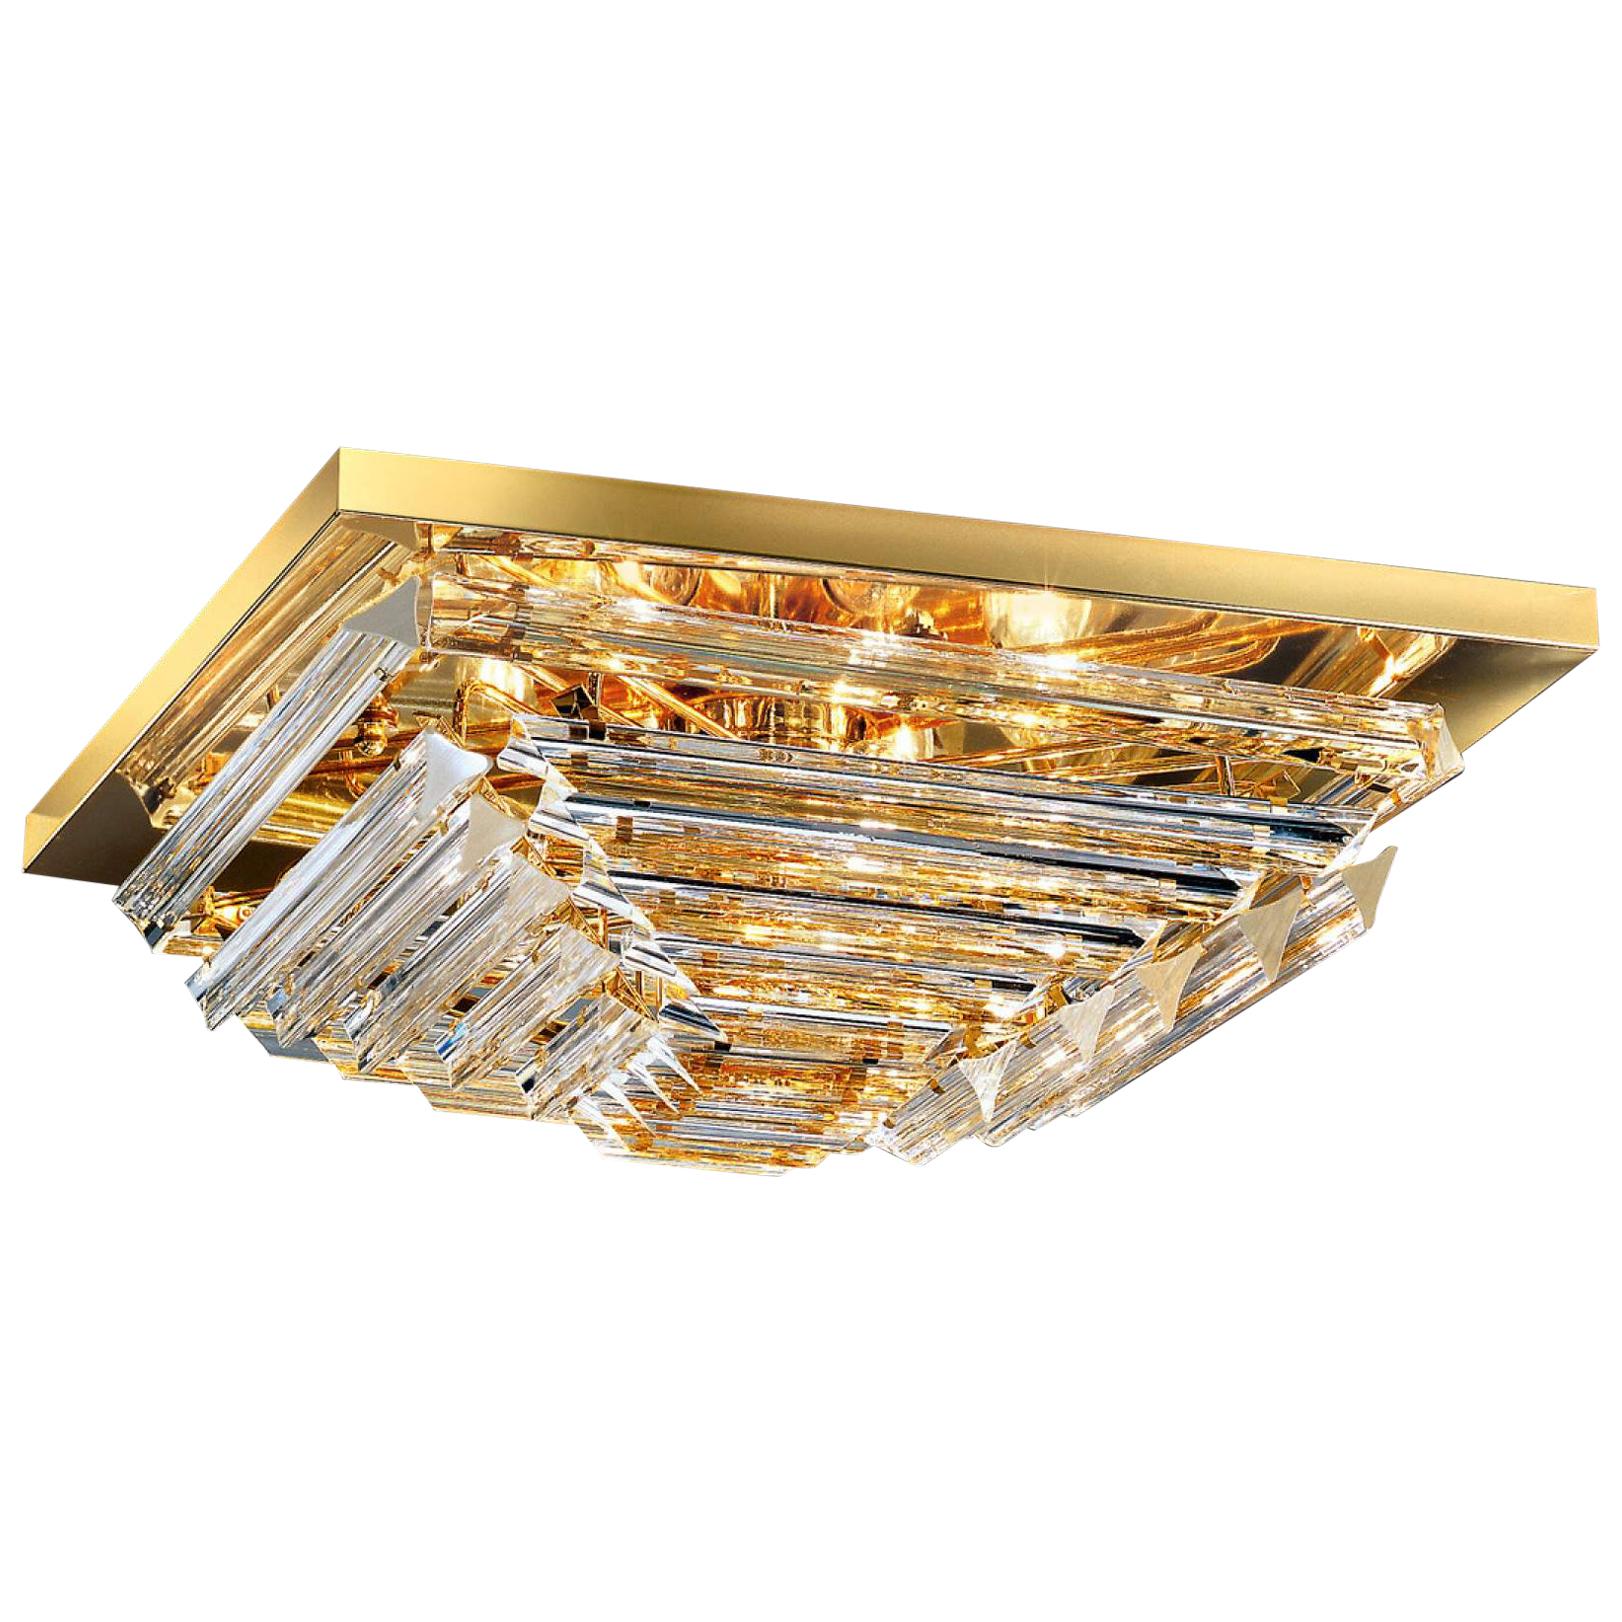 Gorgeous contemporary square ceiling light with clear triedi Murano glasses on gold plated square frame.
   
Four E 14 light bulbs. We can wire for your country standards.
  